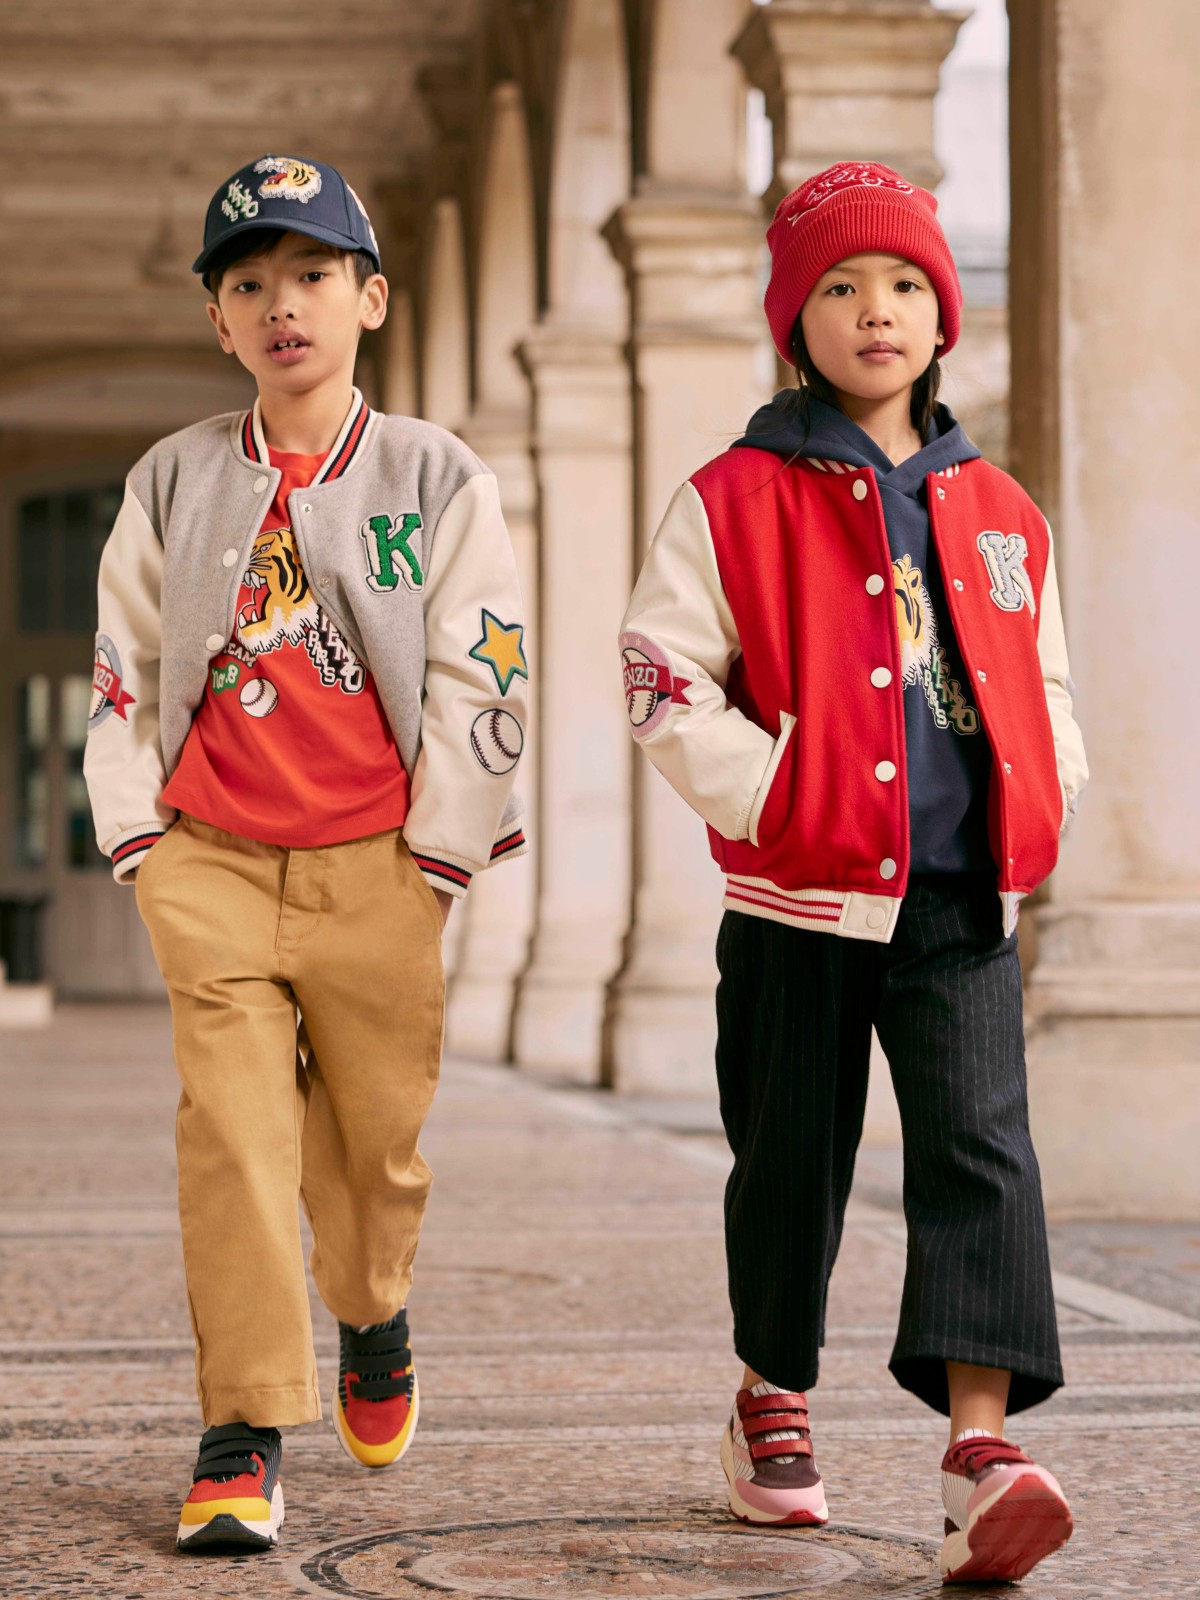 Buy Latest Kids Boys Dresses Online at Best Prices in India | Free Shipping